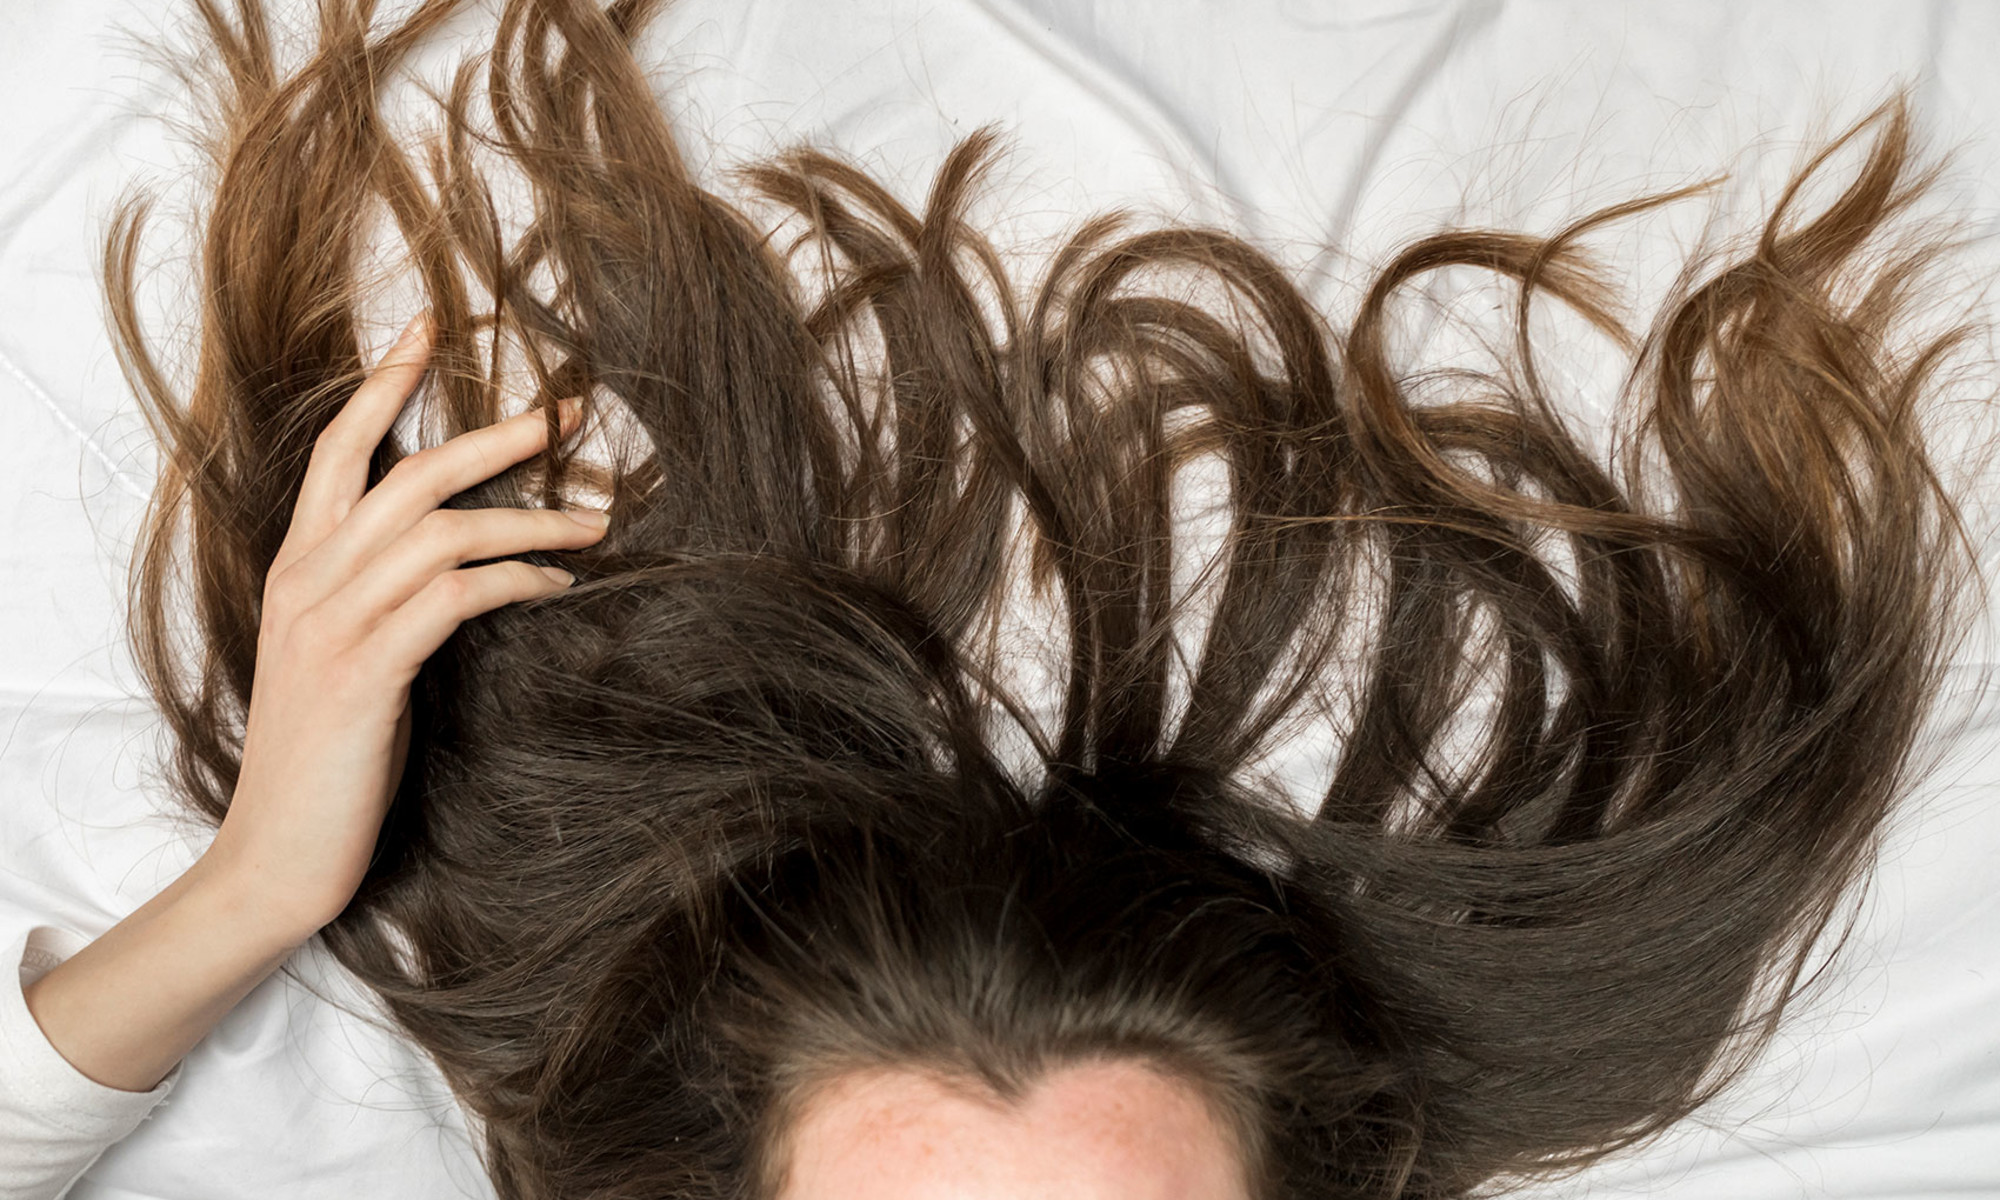 6 Vitamins to Boost Hair Growth, According to a Trichologist* |  mindbodygreen